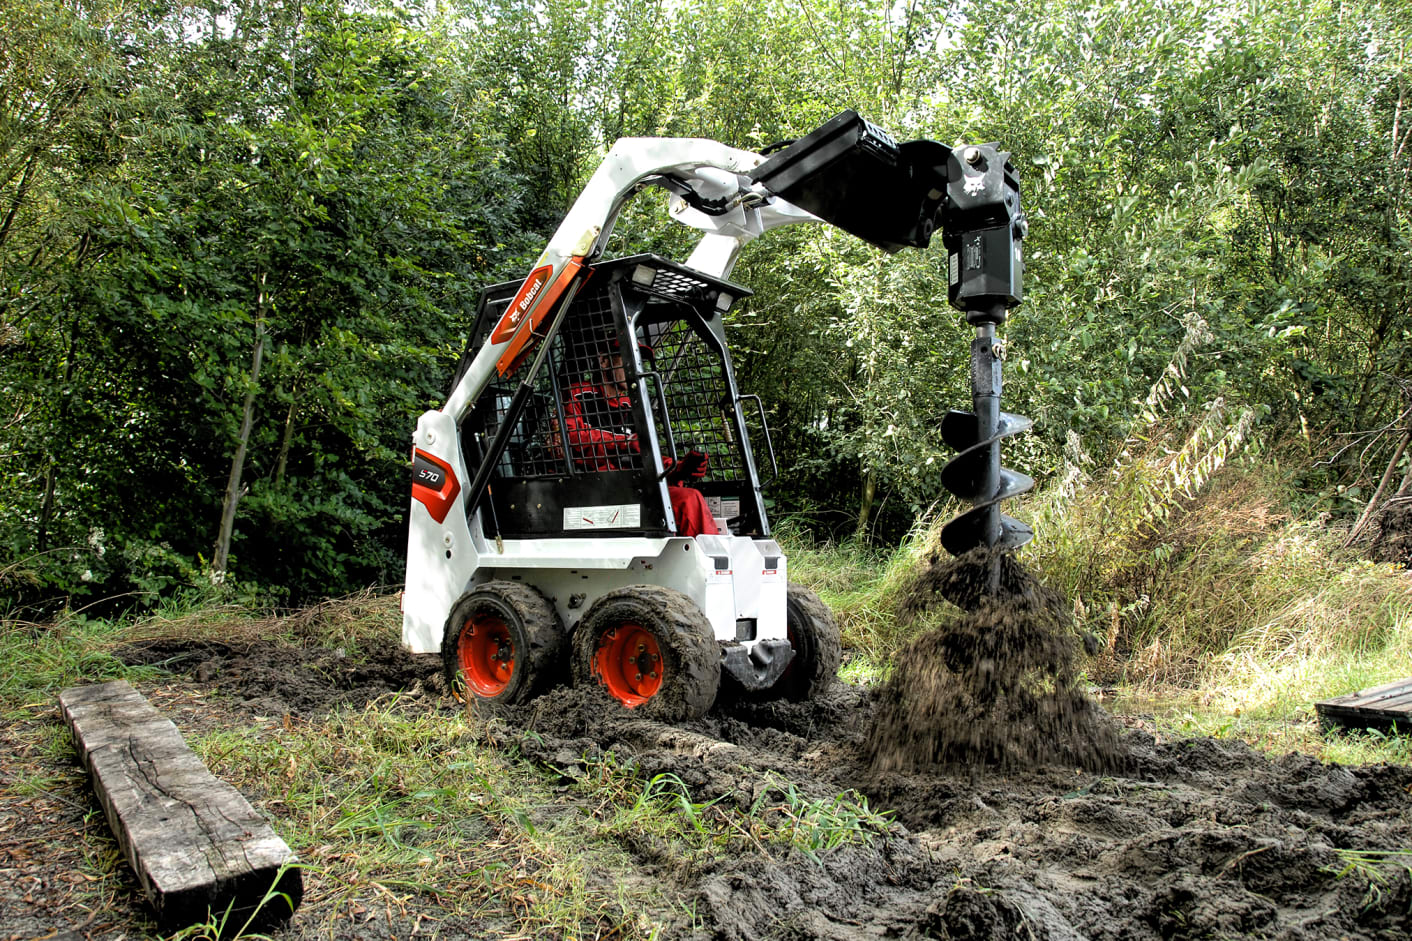 Browse Specs and more for the Bobcat S70 Skid-Steer Loader - White Star Machinery